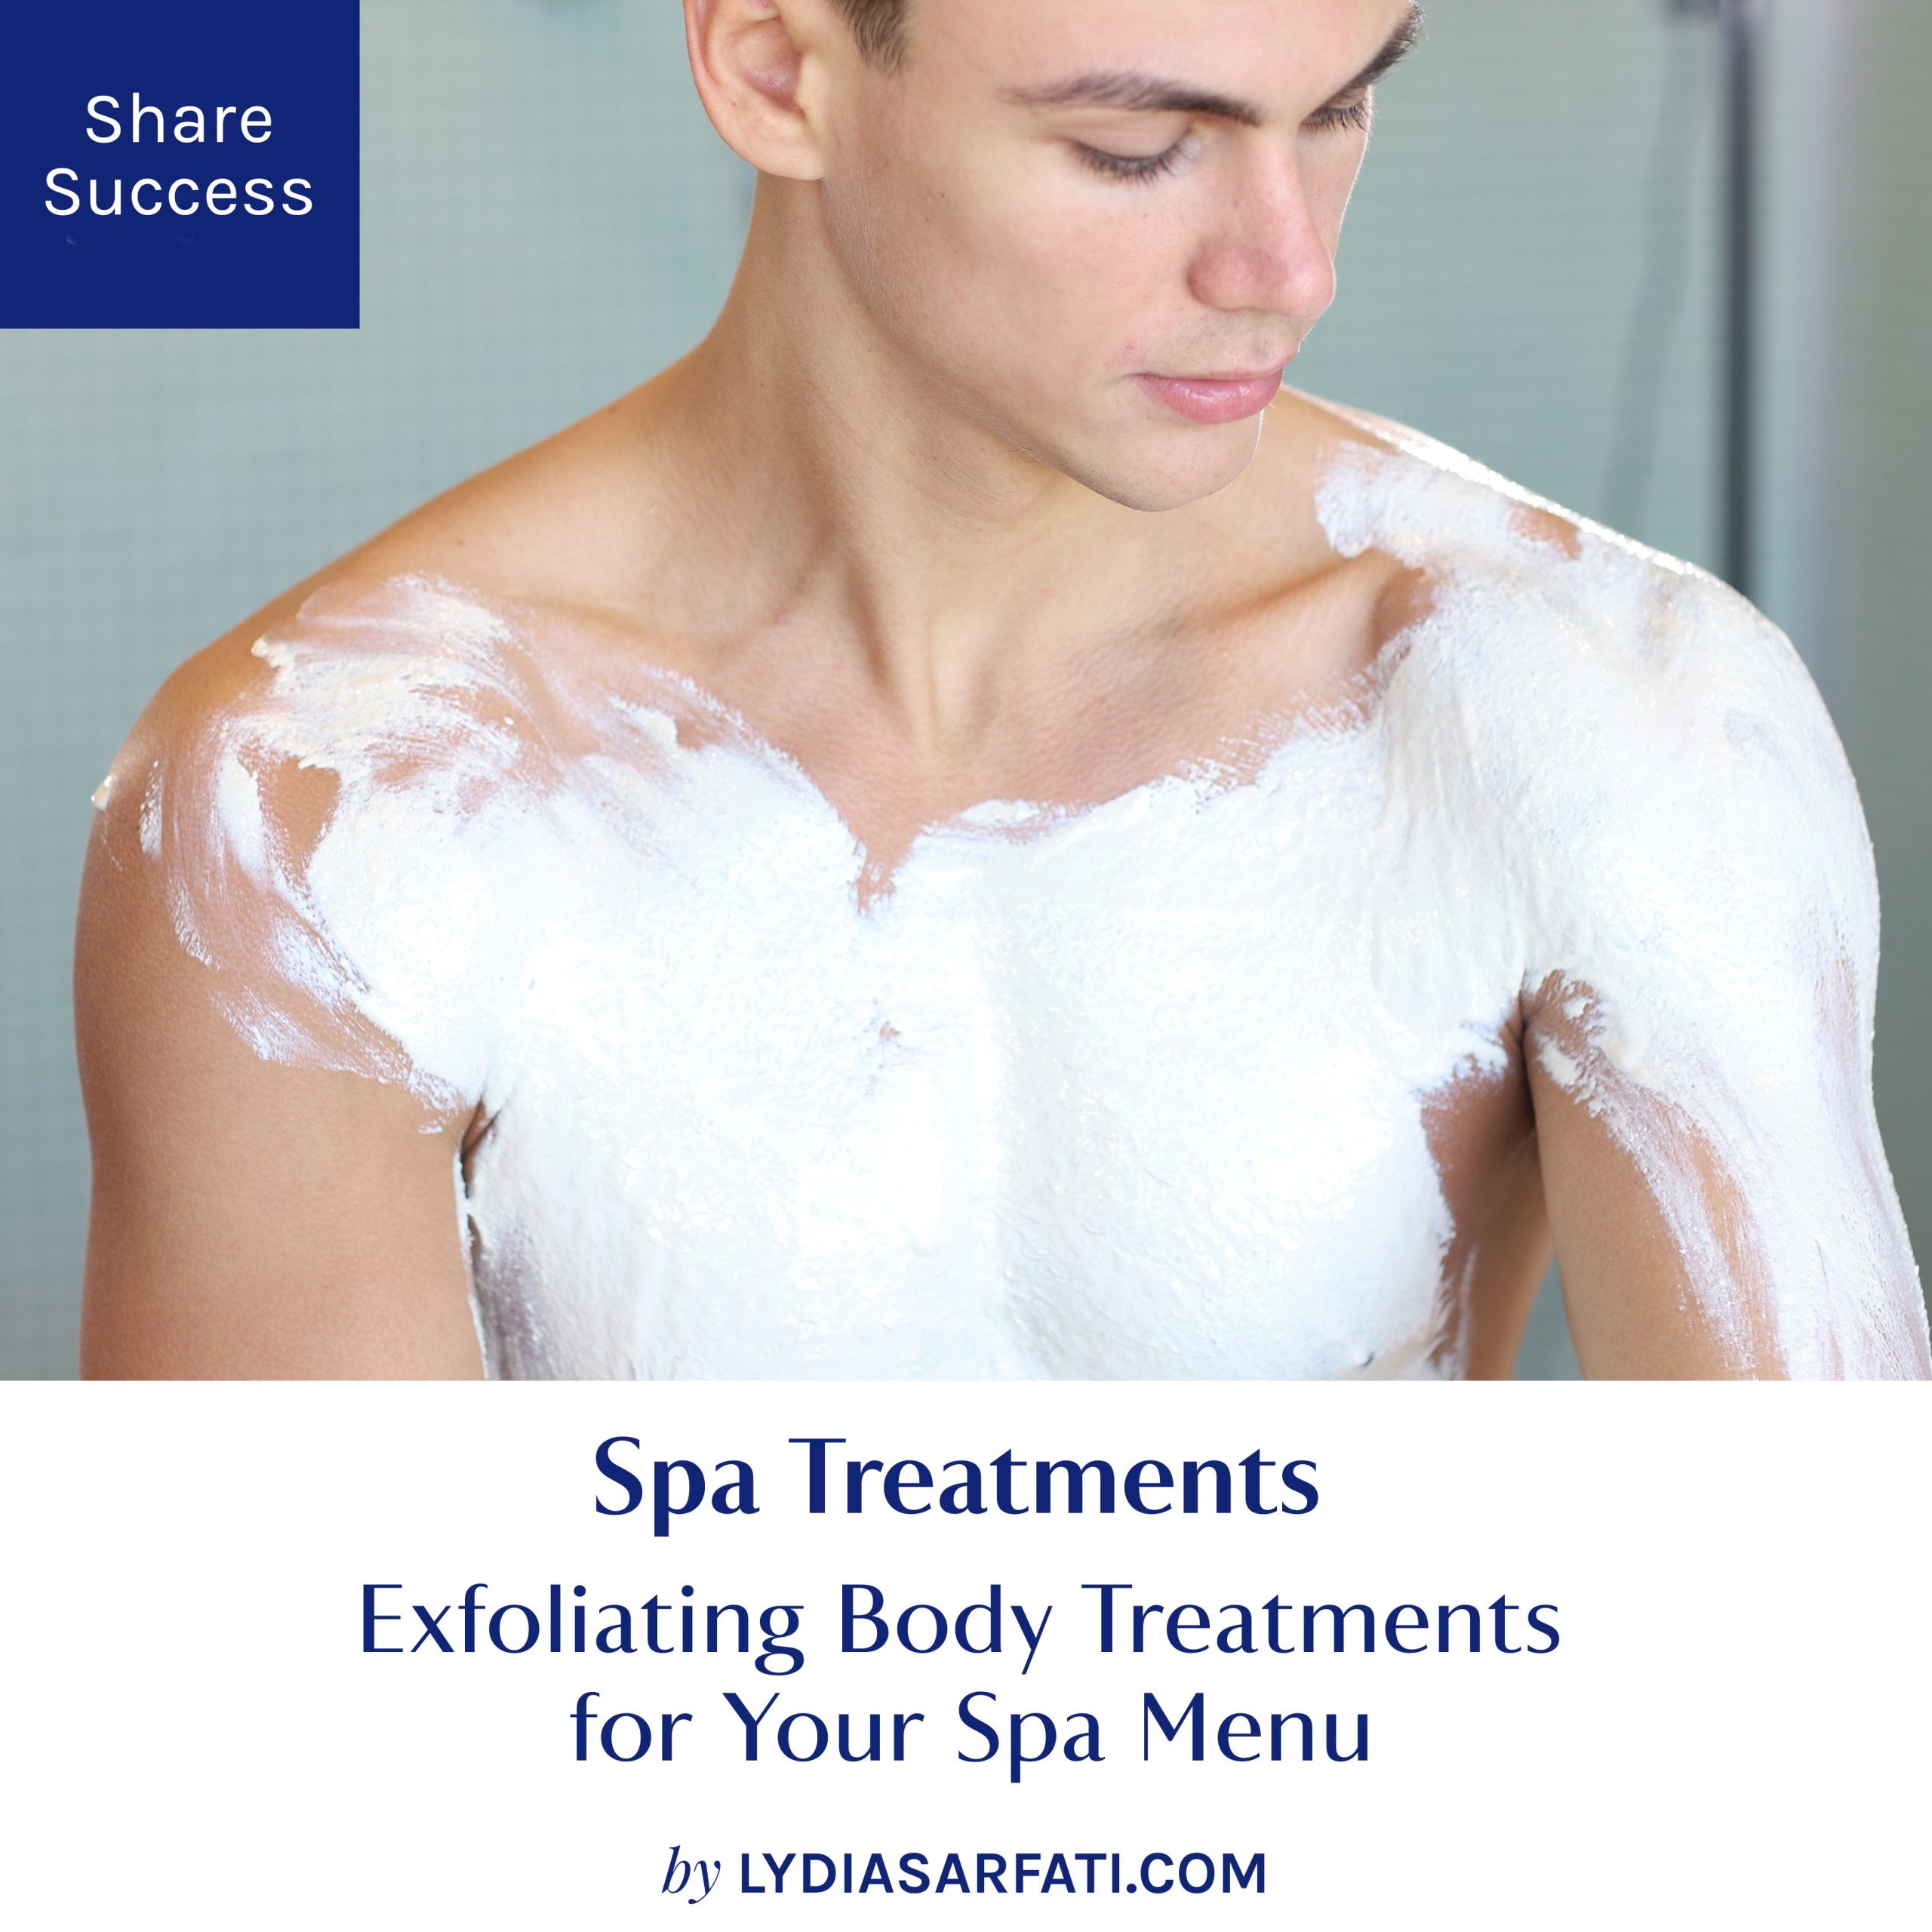 The Best Exfoliating Body Treatments for Your Spa Menu